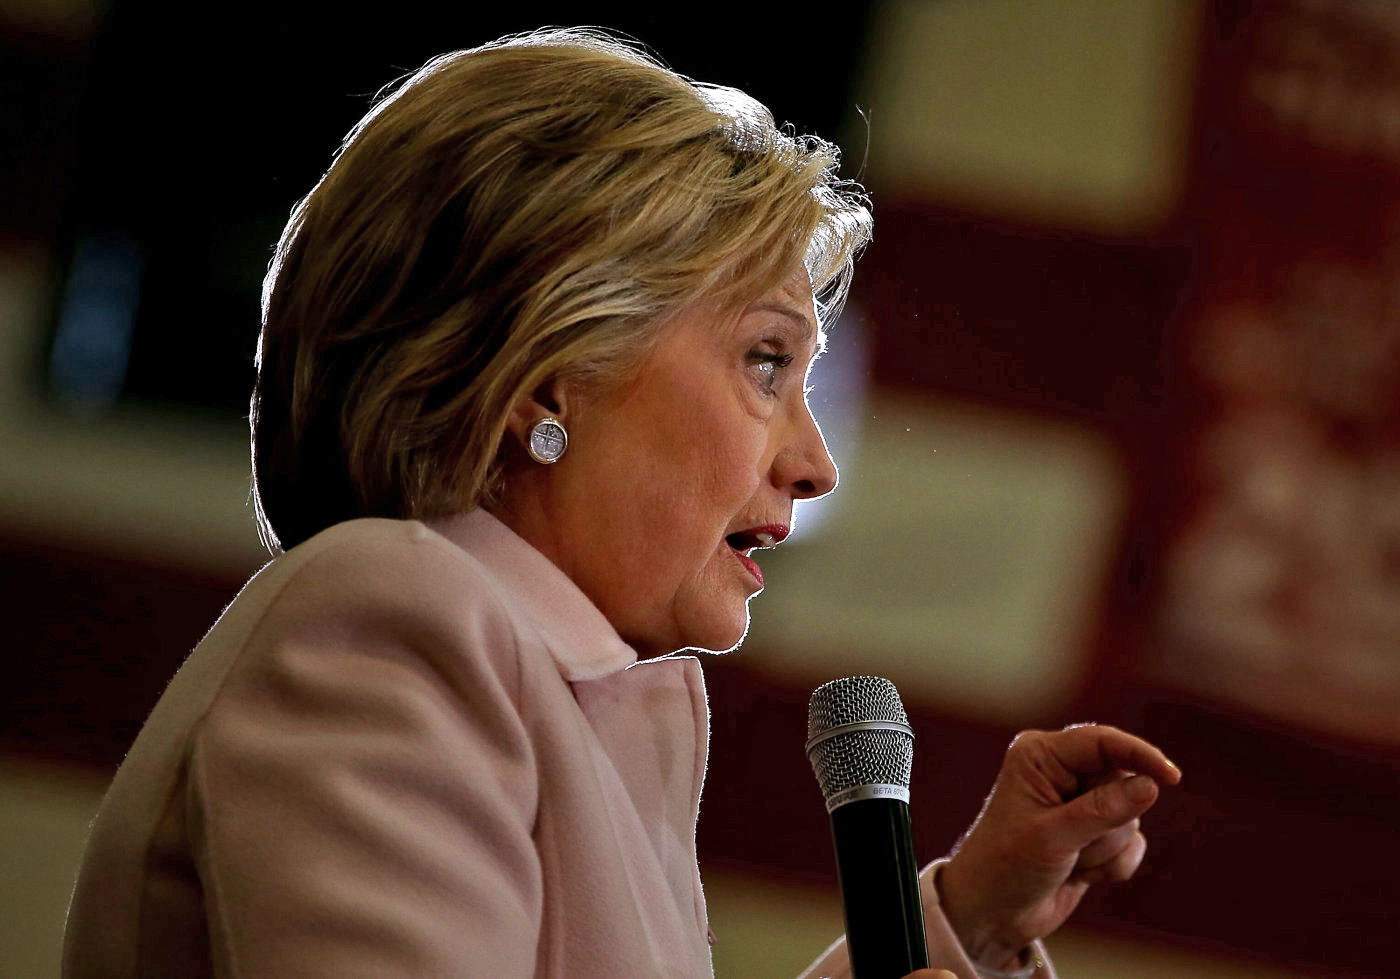 US government says 22 Clinton emails contain top secret info